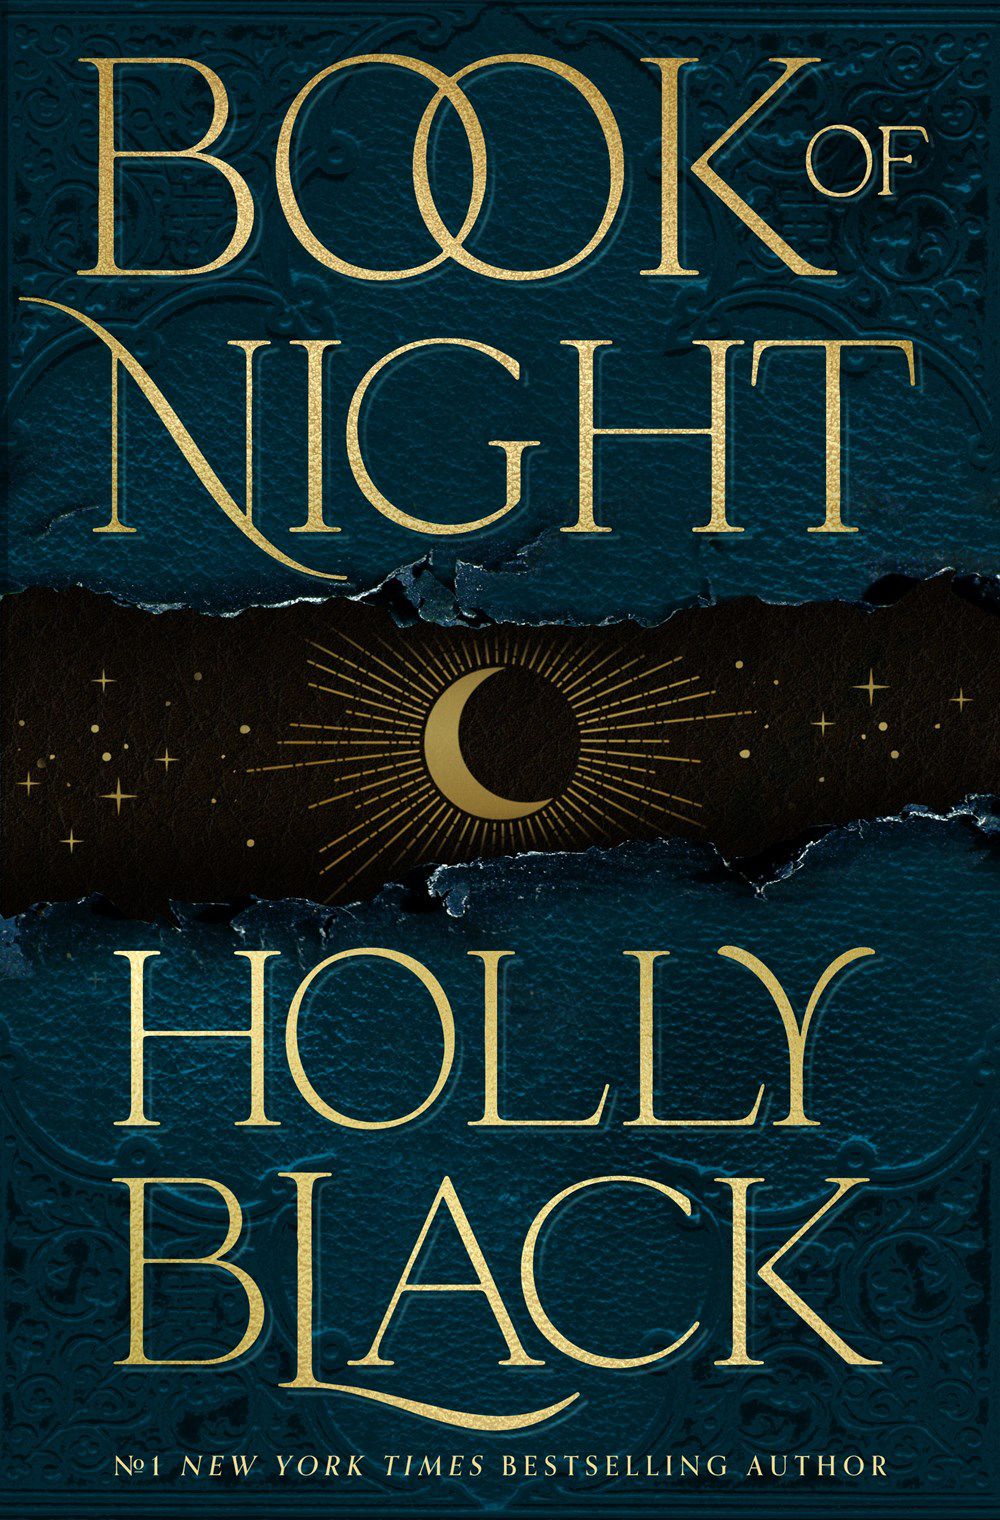 The cover of Holly Black's Book of Night, featuring a half moon on a black and blue background.